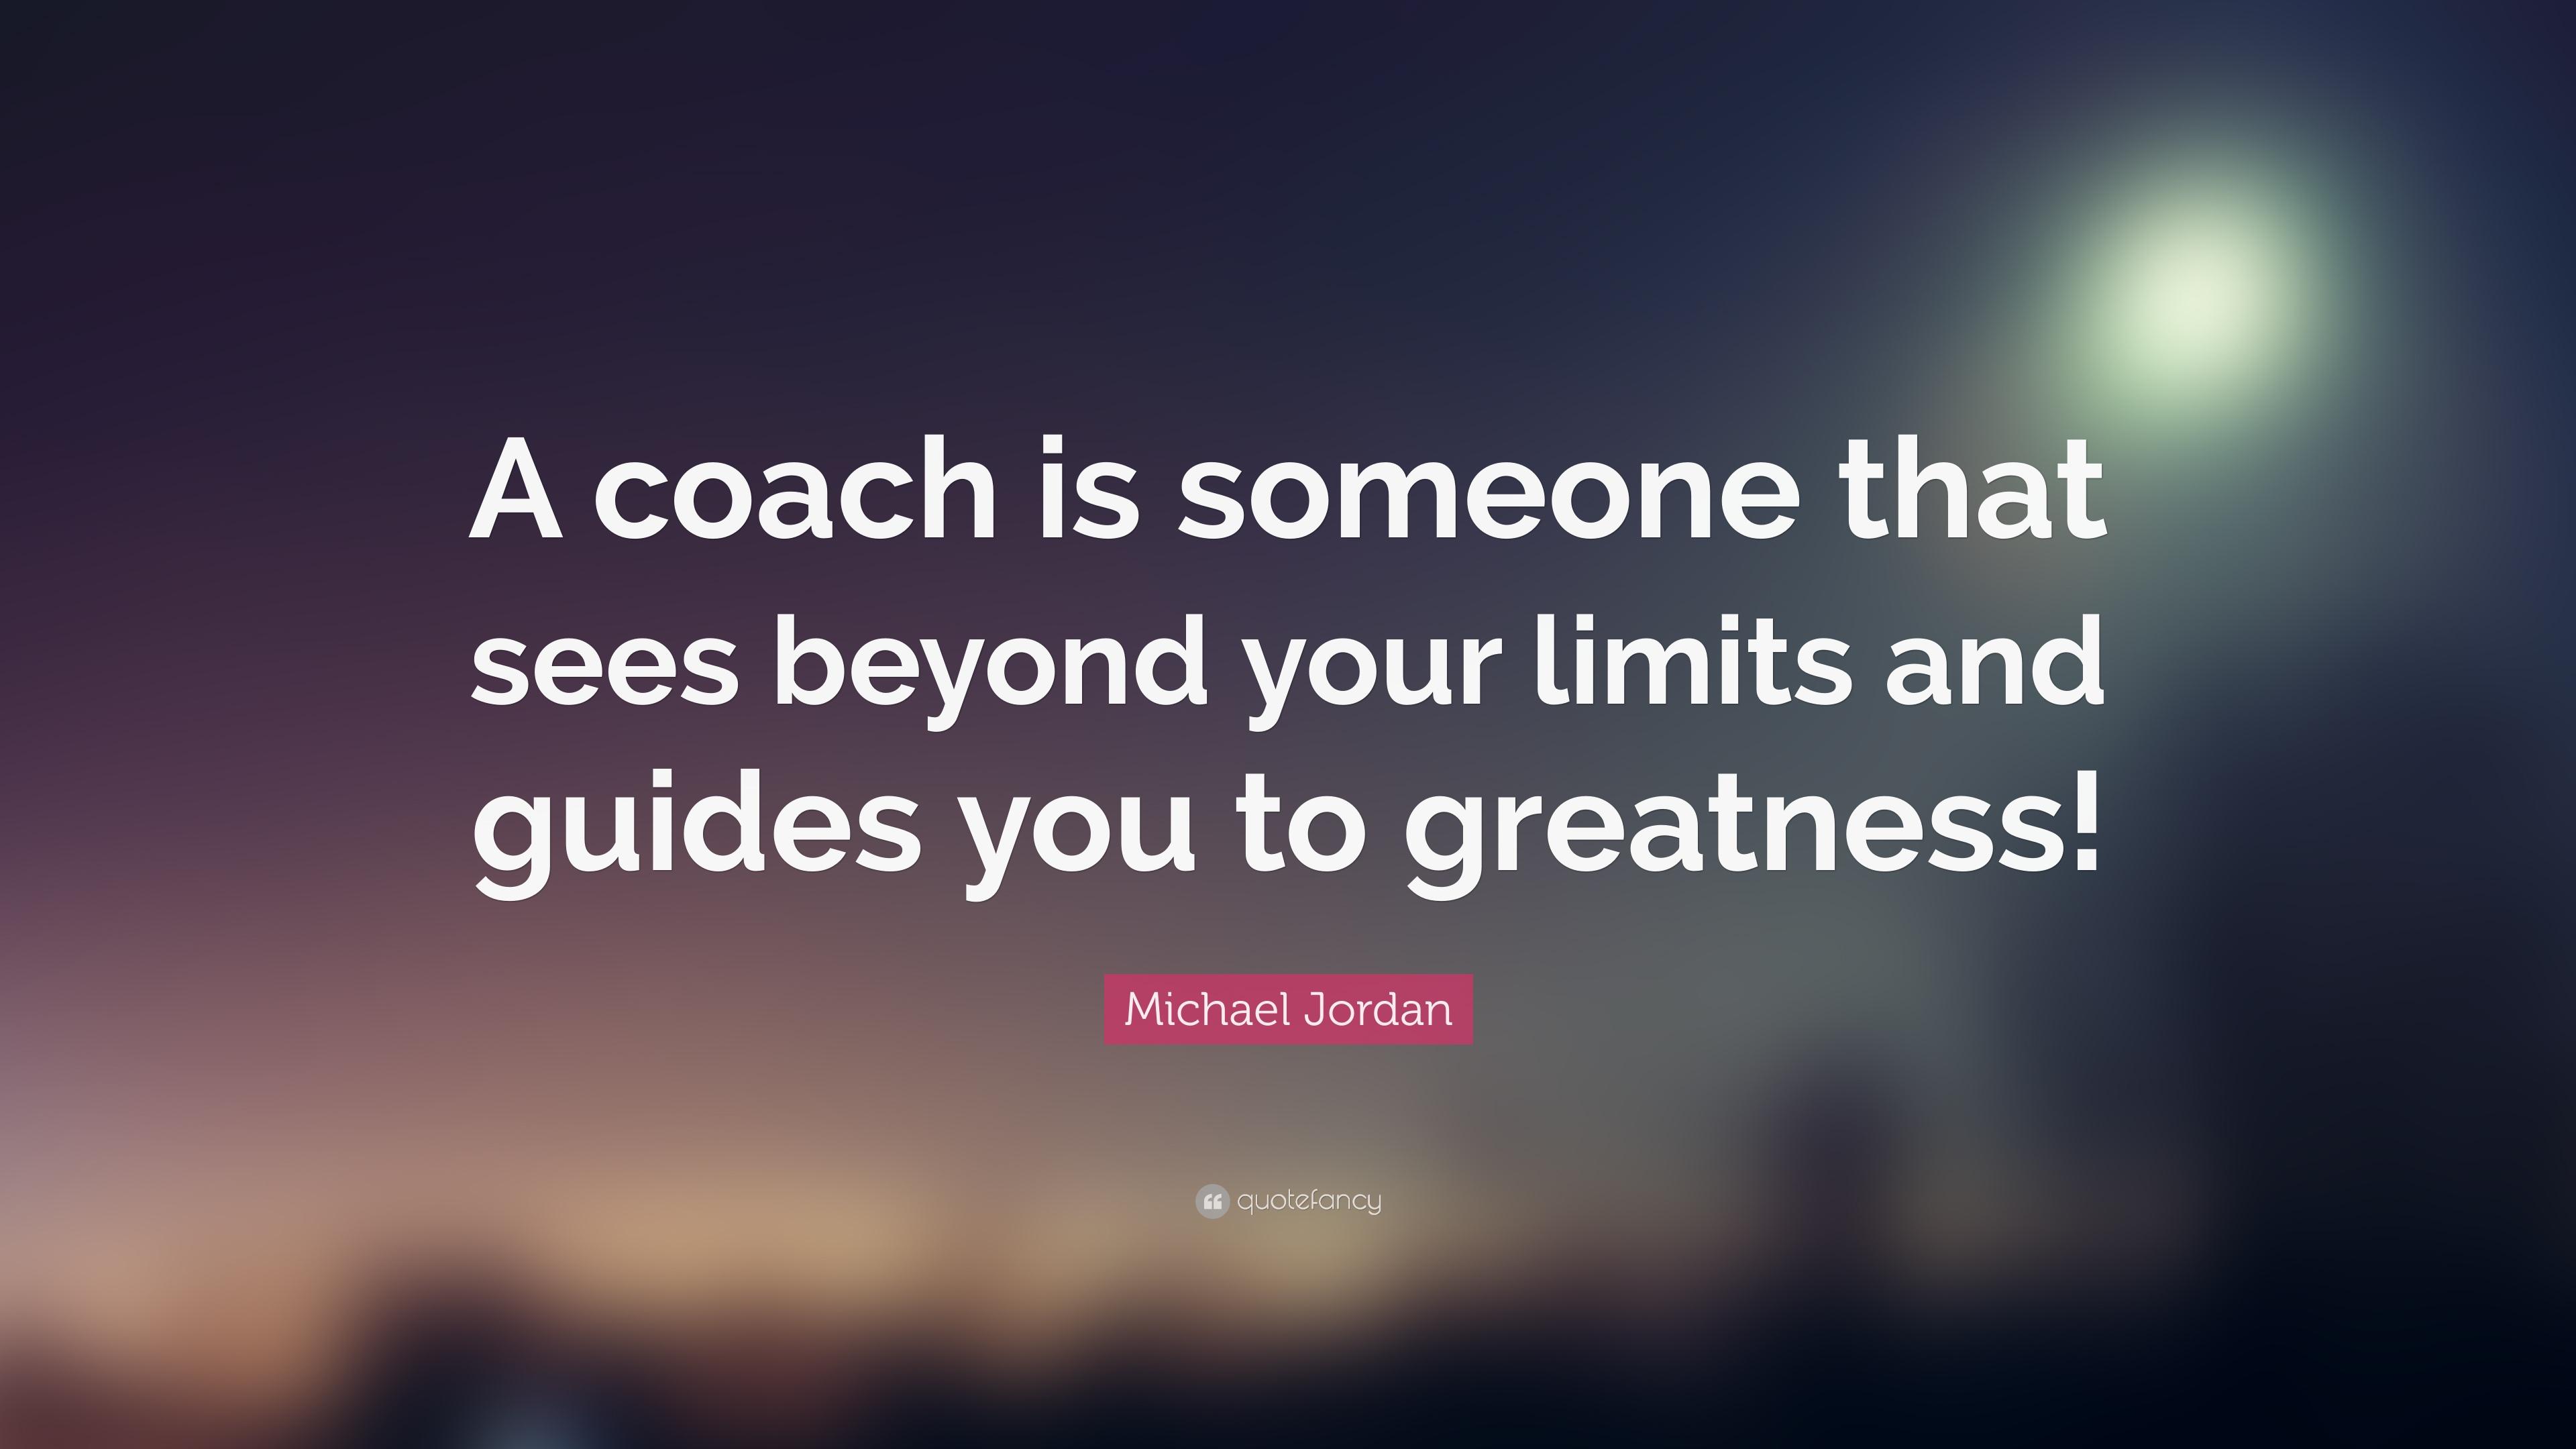 Michael Jordan Quote: “A coach is someone that sees beyond your